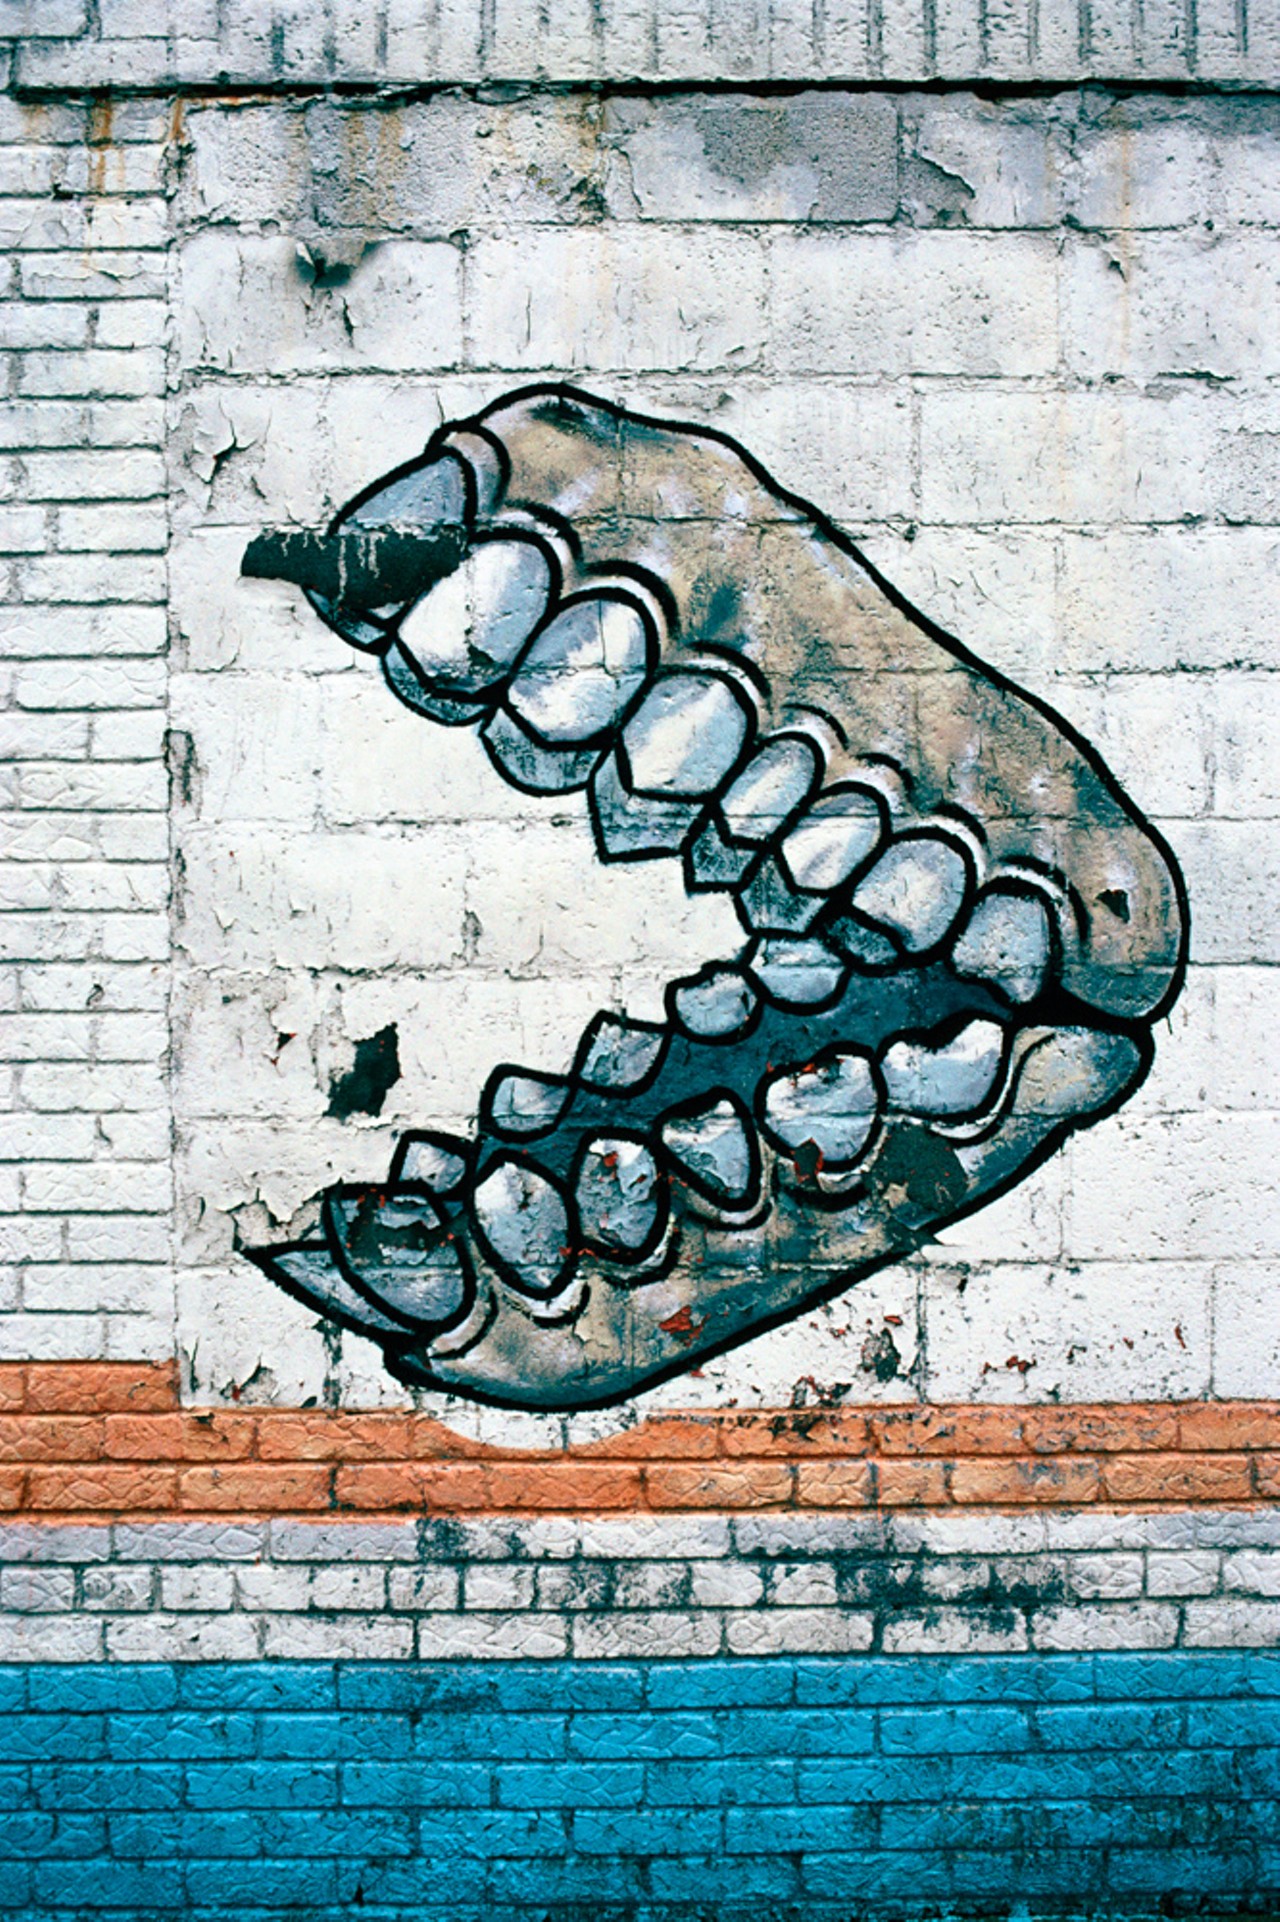 &#147;Decayed Dentures,&#148; Customized Dental Laboratory, 2919 Mack Avenue, Detroit, 2007.  The artist Bird commented "when they were first painted they looked good."